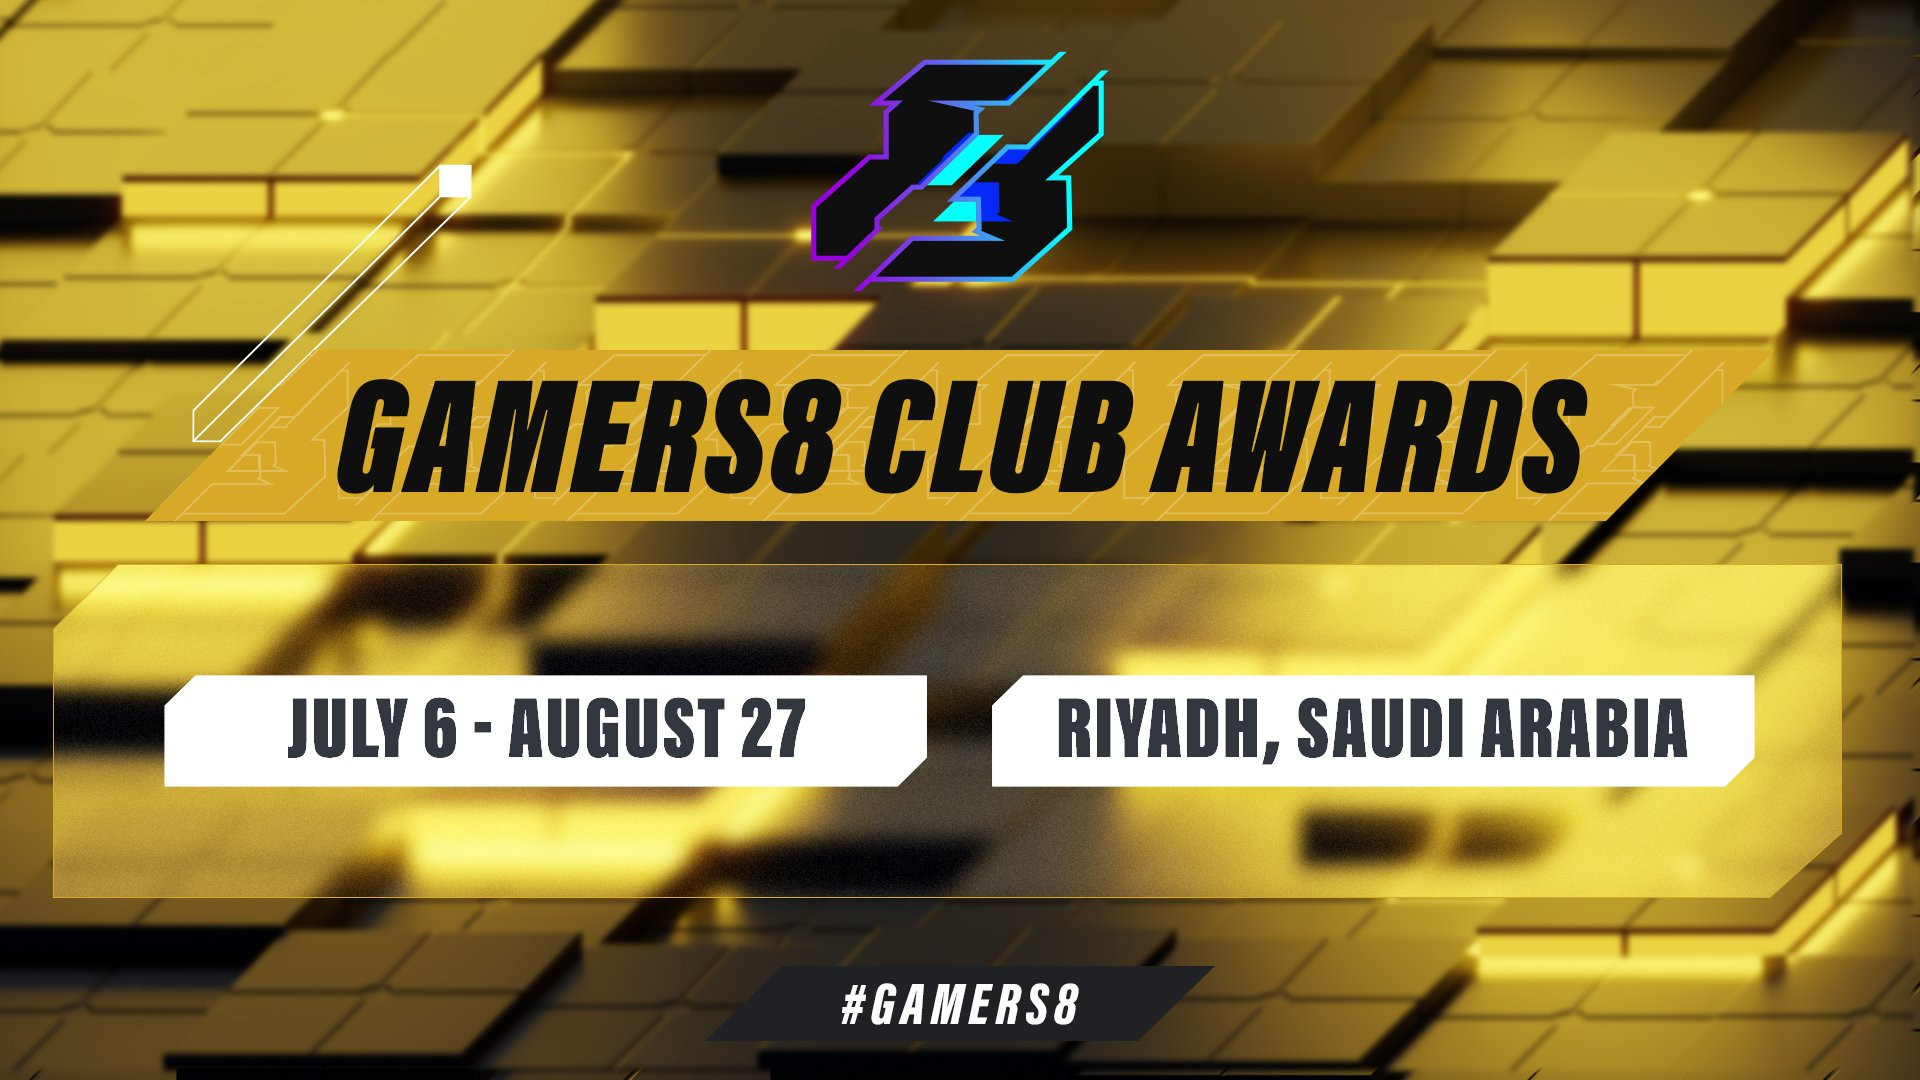 Saudi Esports Federation reveals $5 million cross-title prize fund for Gamers8 image